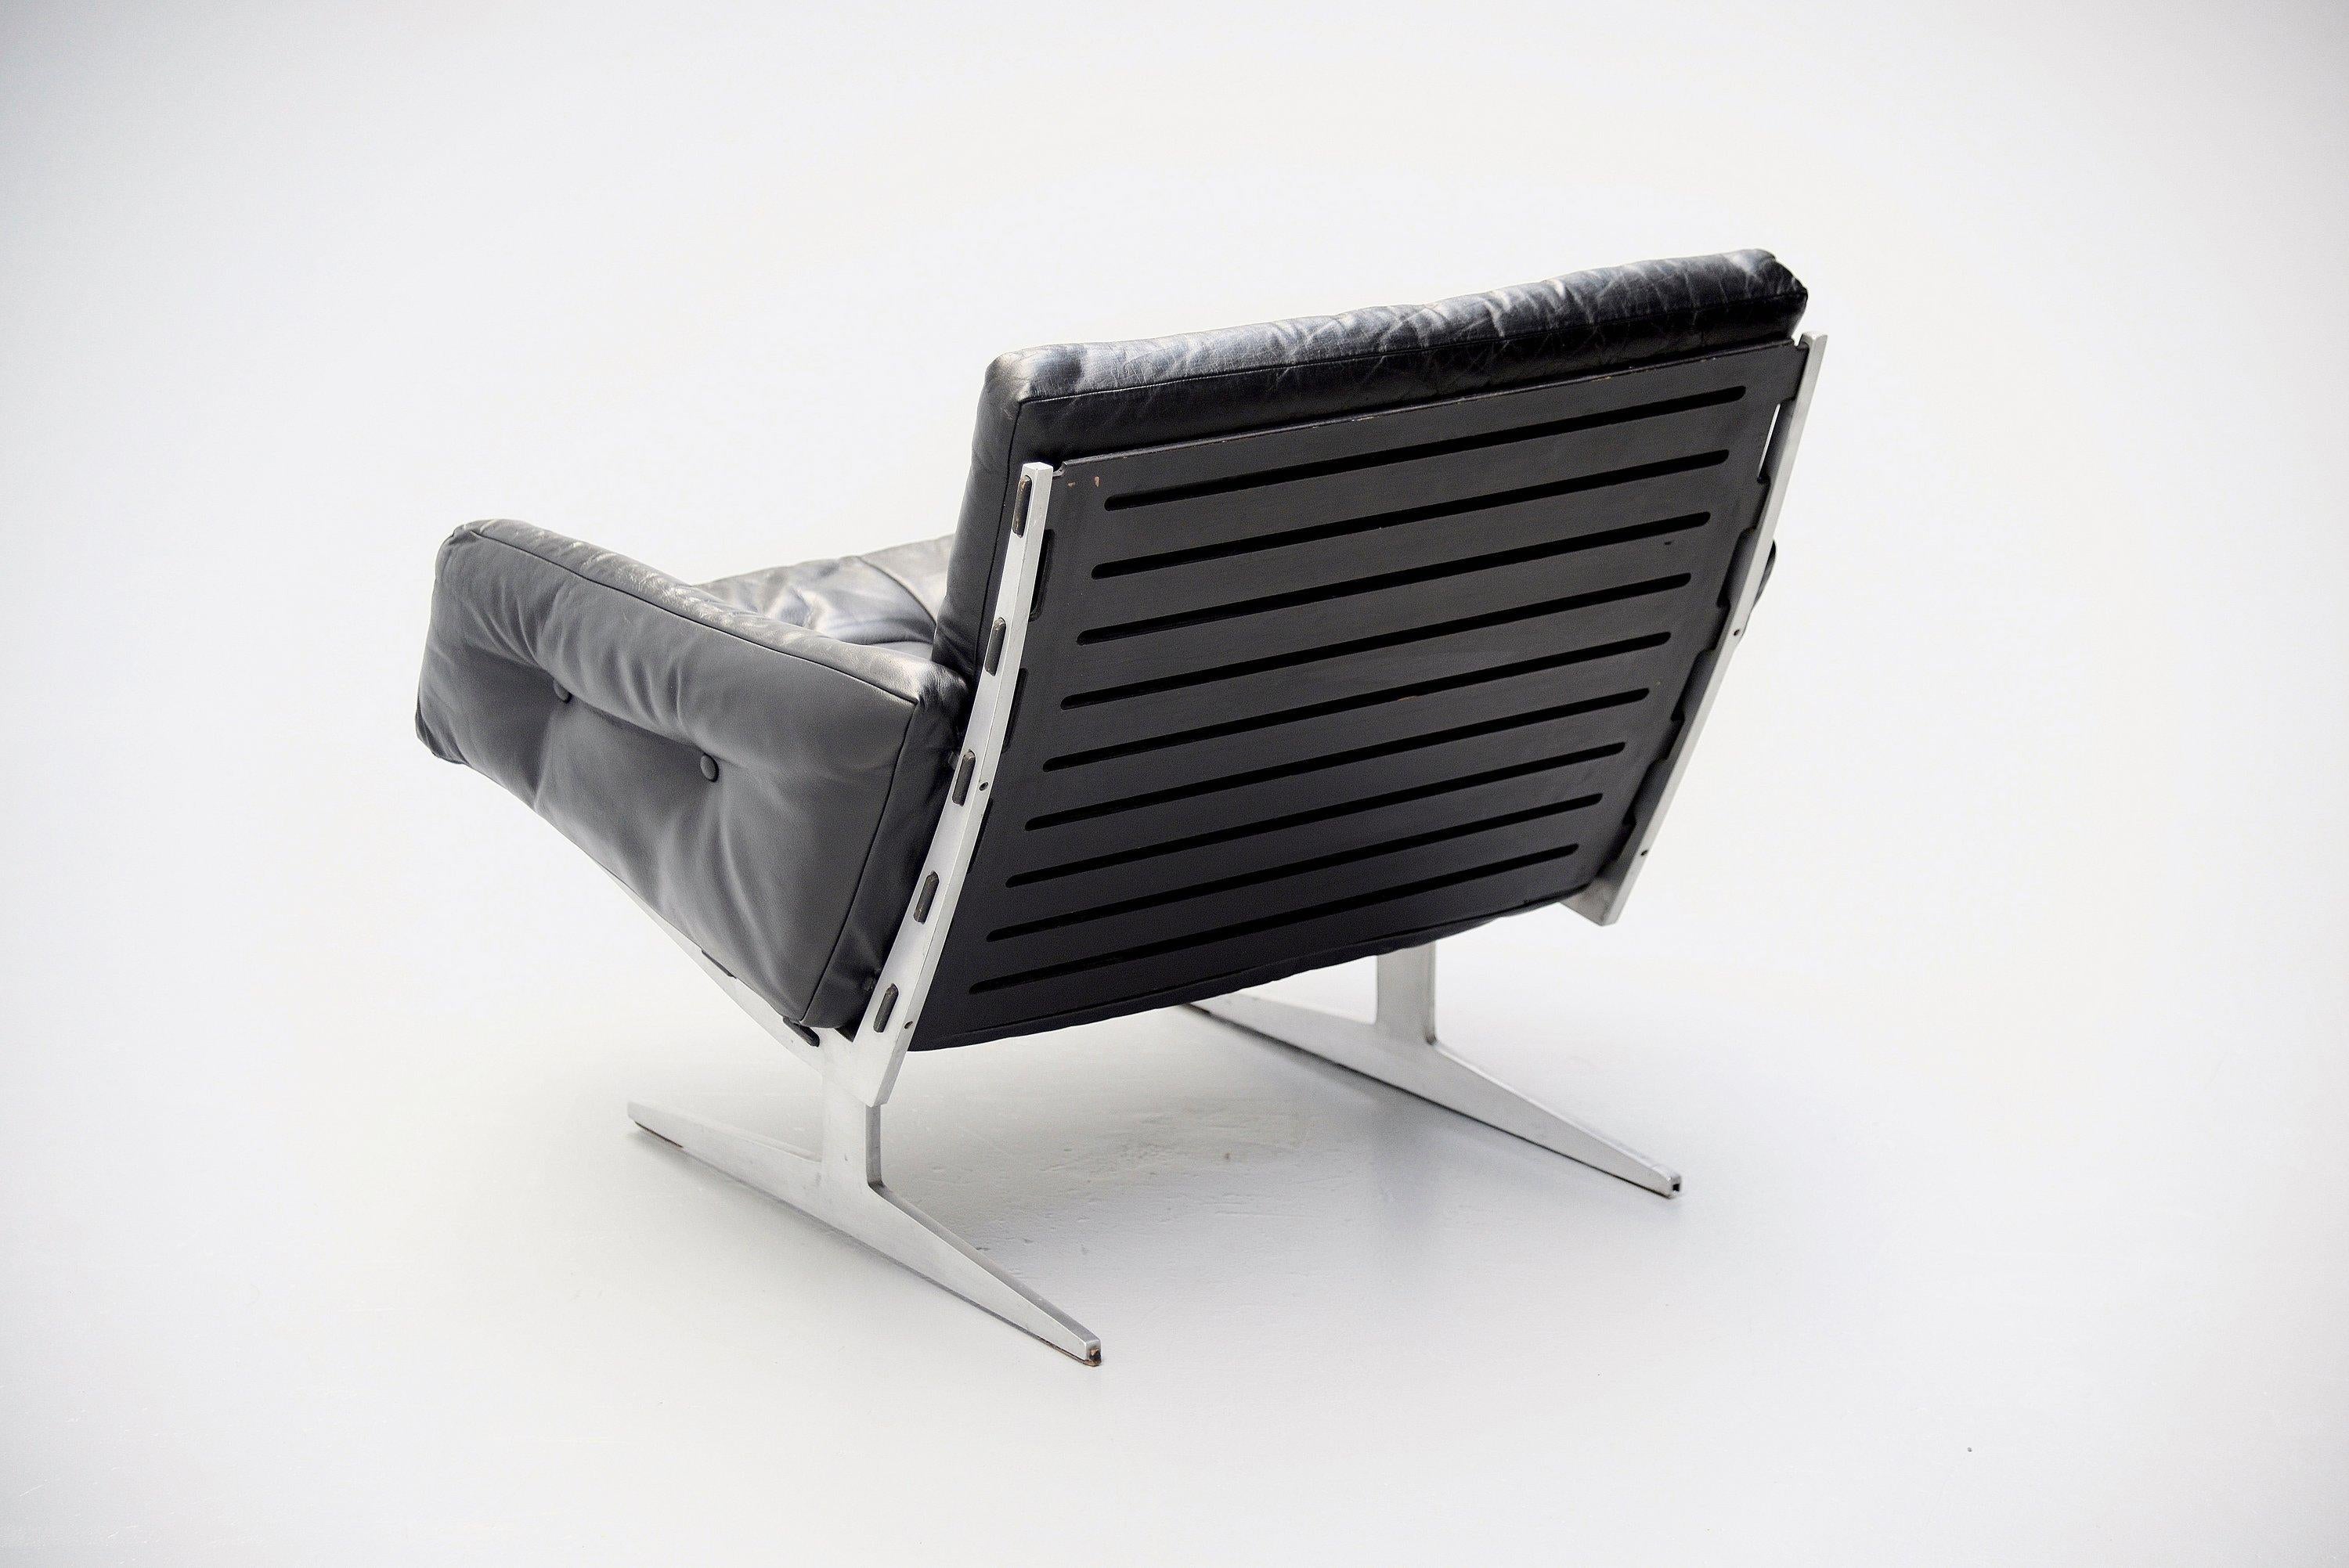 Nice armchair designed by Paul Leidersdorff and manufactured by A. Leidersdorffsen A/S, Denmark, 1965. The chair has a solid aluminum slipper frames, with black lacquered plywood seat and back and tufted leather cushions and arm rests. Very nice